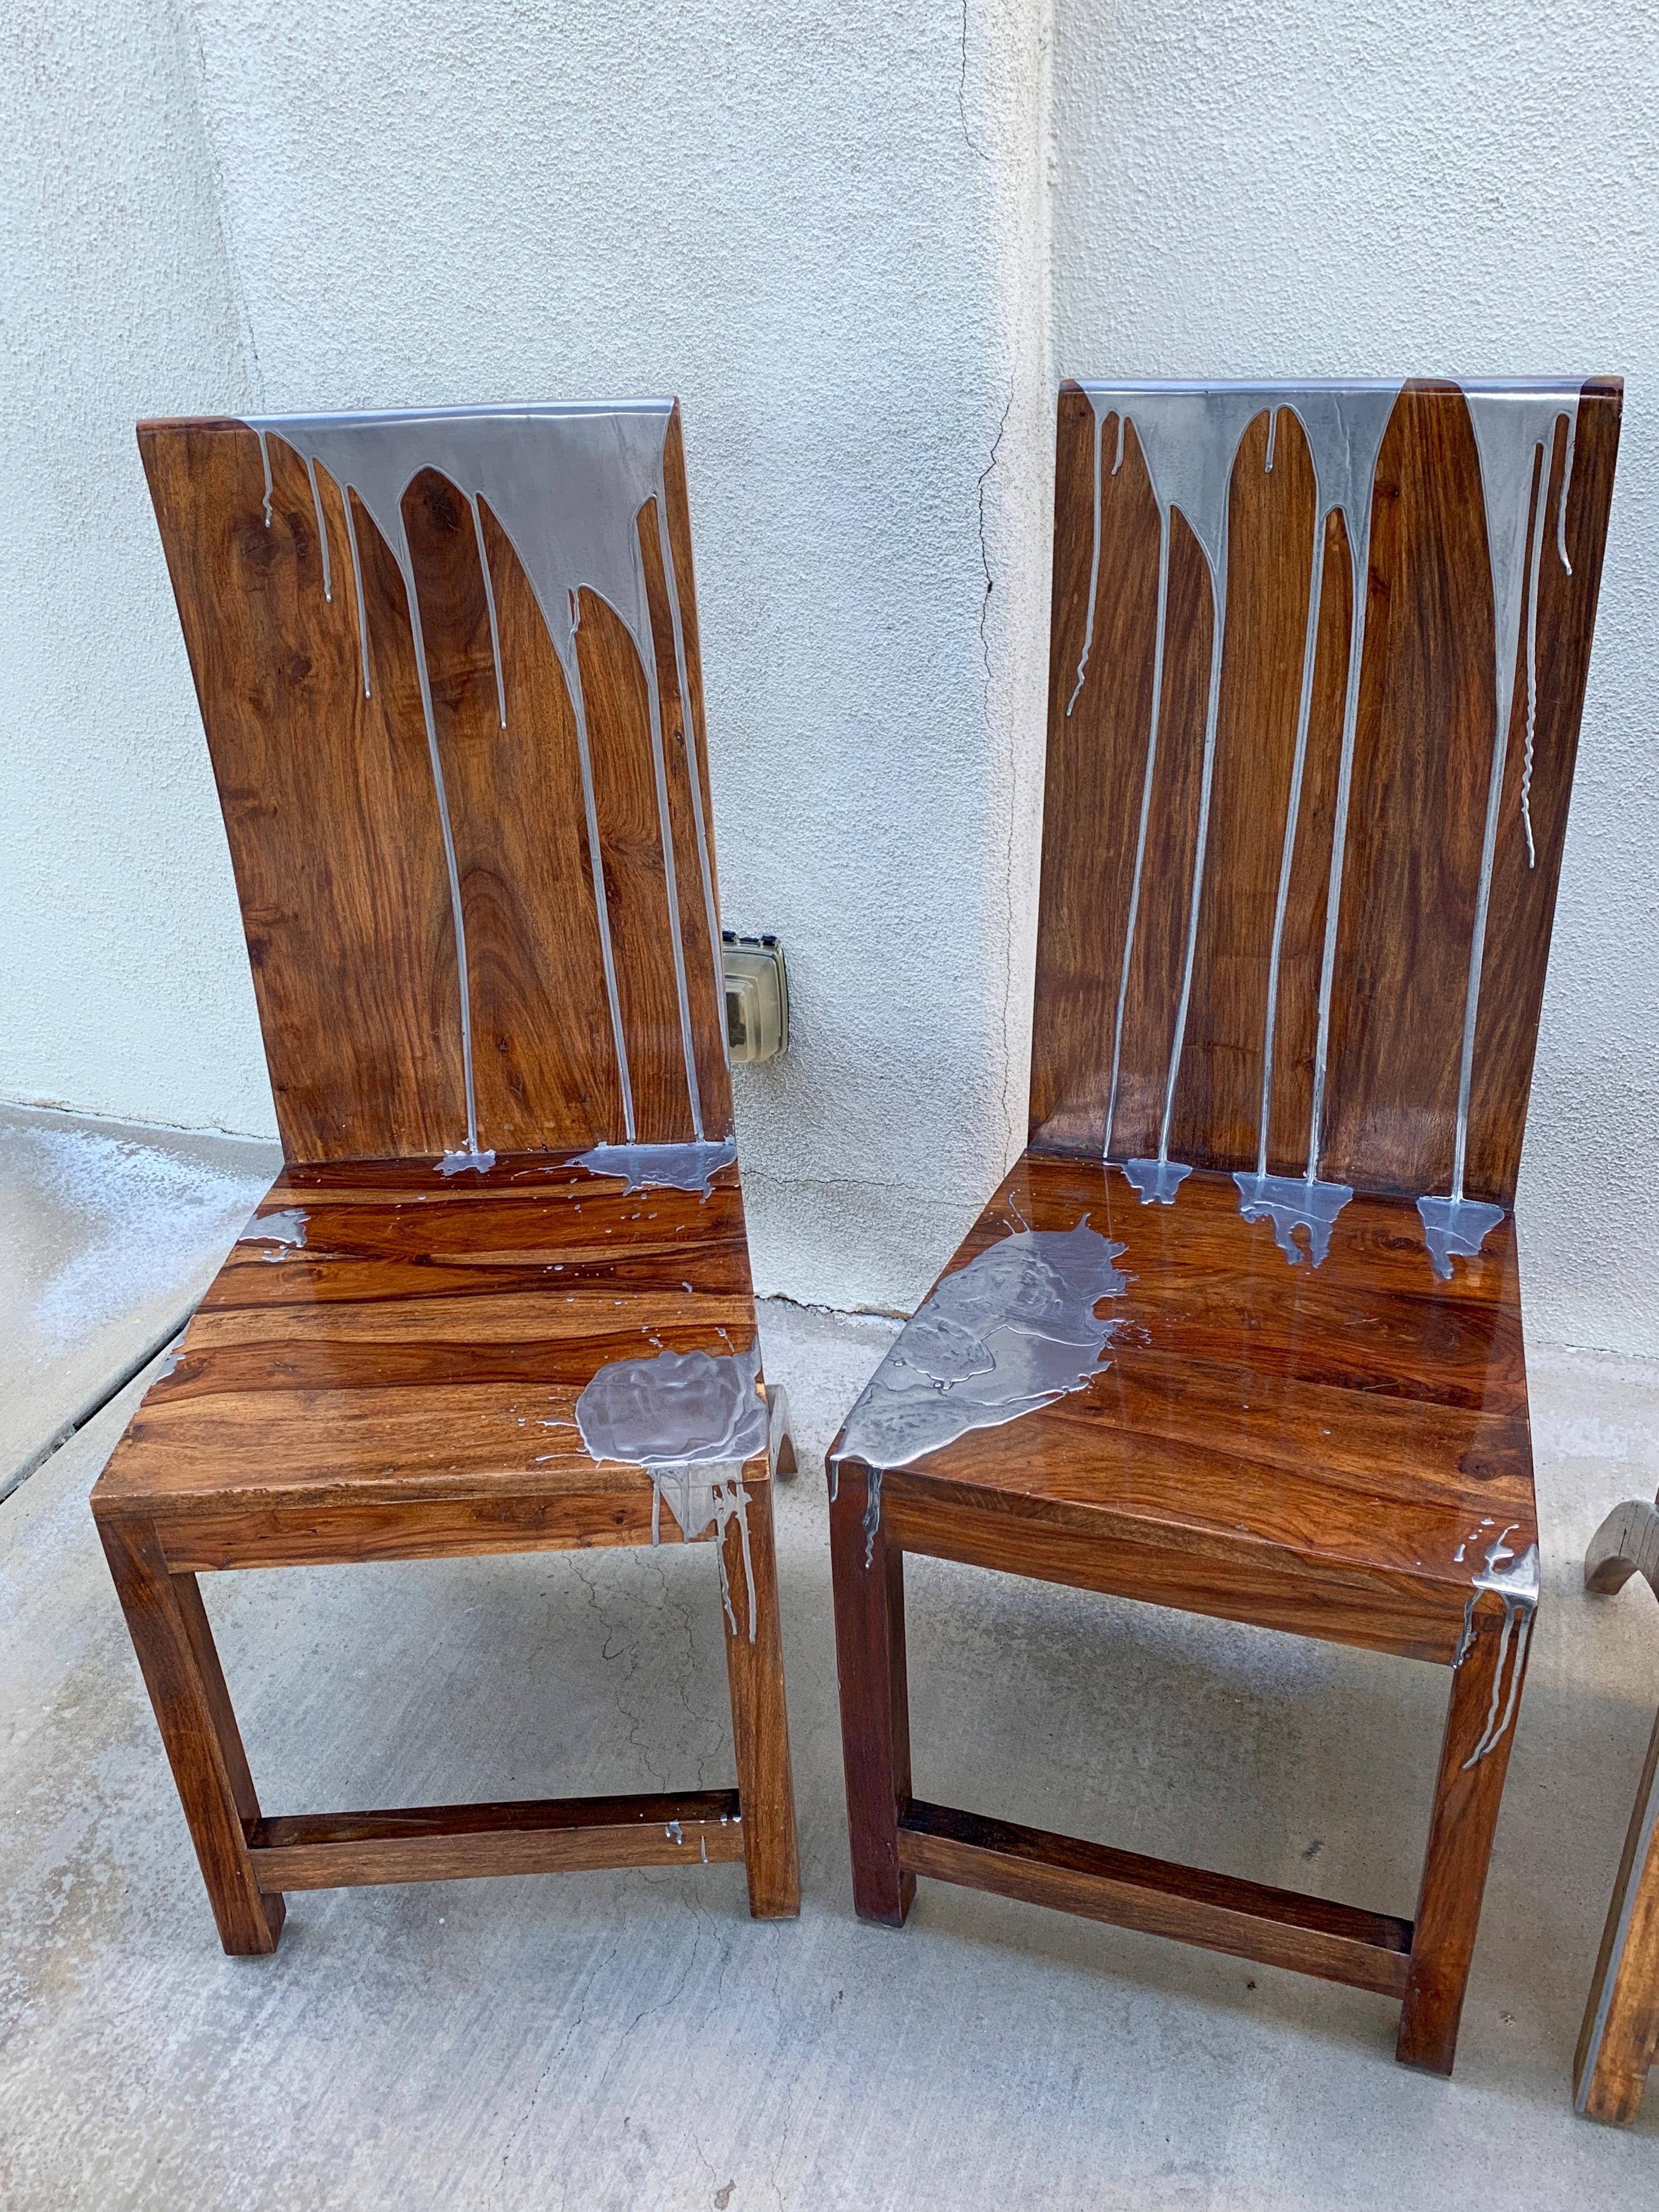 A set of 4 dining or side chairs in hand built from the hard Acacia wood species and decorated in dripped steel metal by a local Palm Springs artisan. These chairs have had metal applied to them and then polished. They are each unique hand decorated